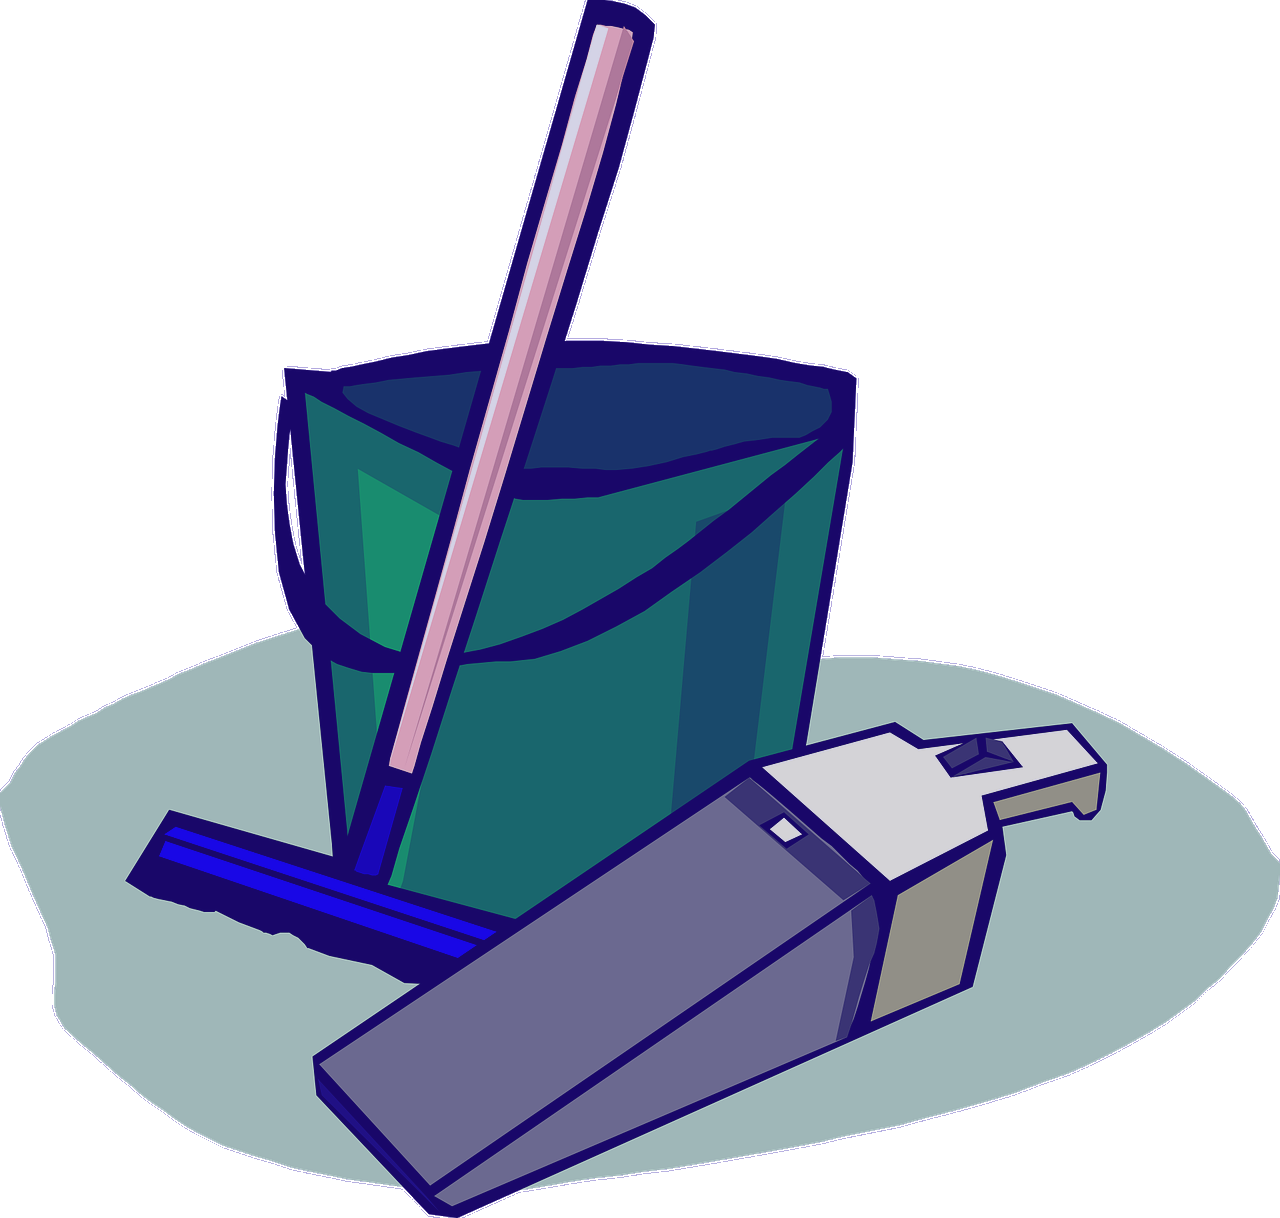 General Cleaning - Cleaning Supplies Clip Art (1280x1218)